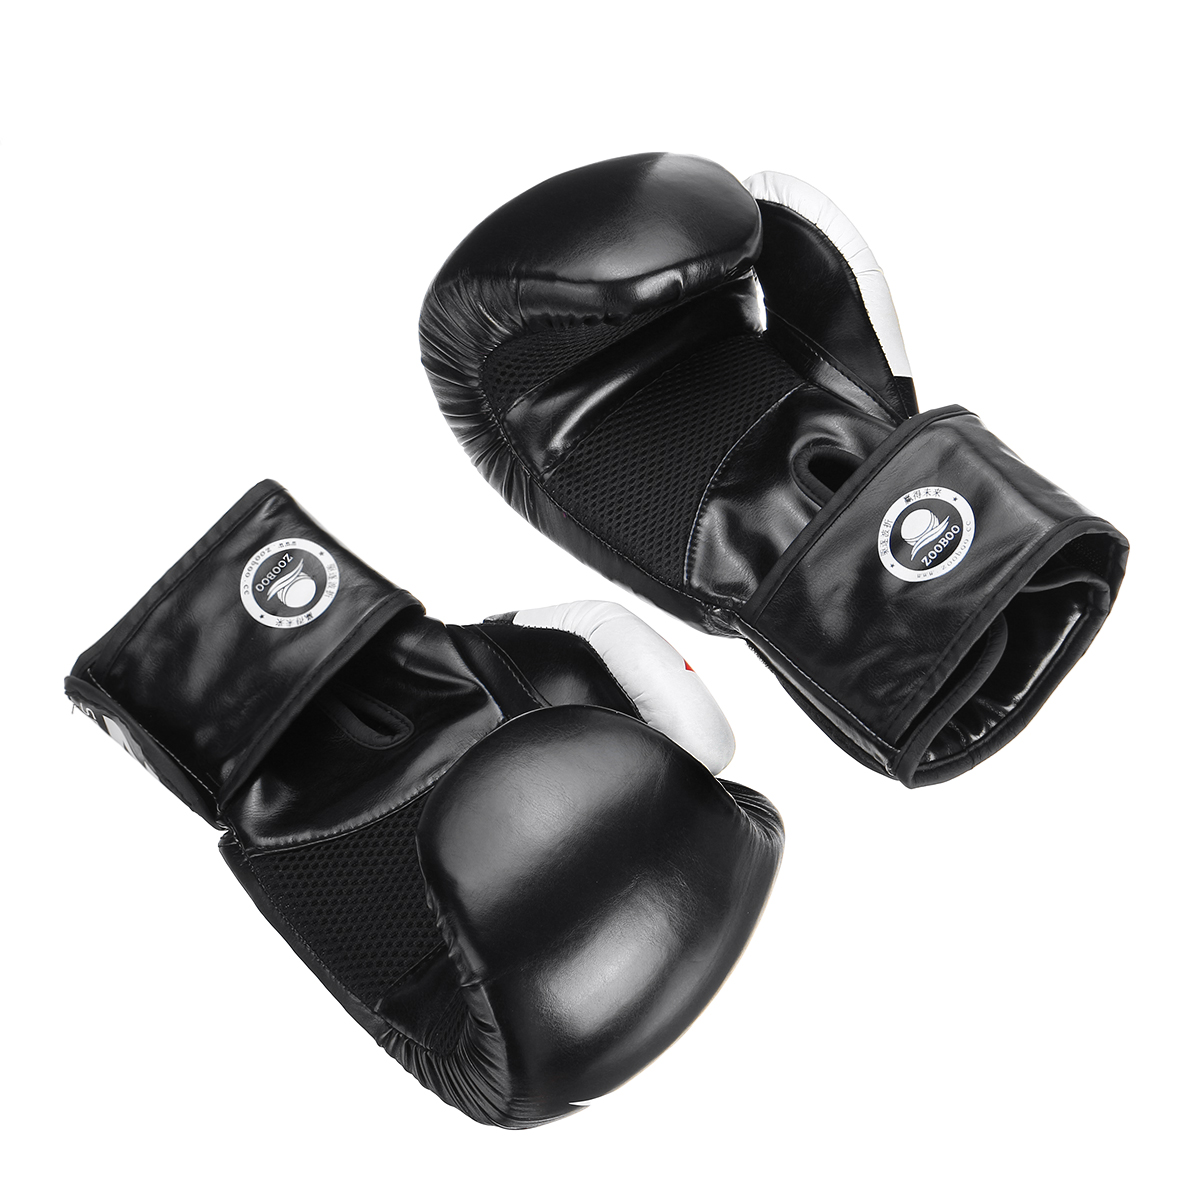 1-Pair-Adult-Boxing-Gloves-Professional-Mesh-Breathable-PU-Leather-Gloves-Sanda-Boxing-Training-Acce-1676767-8